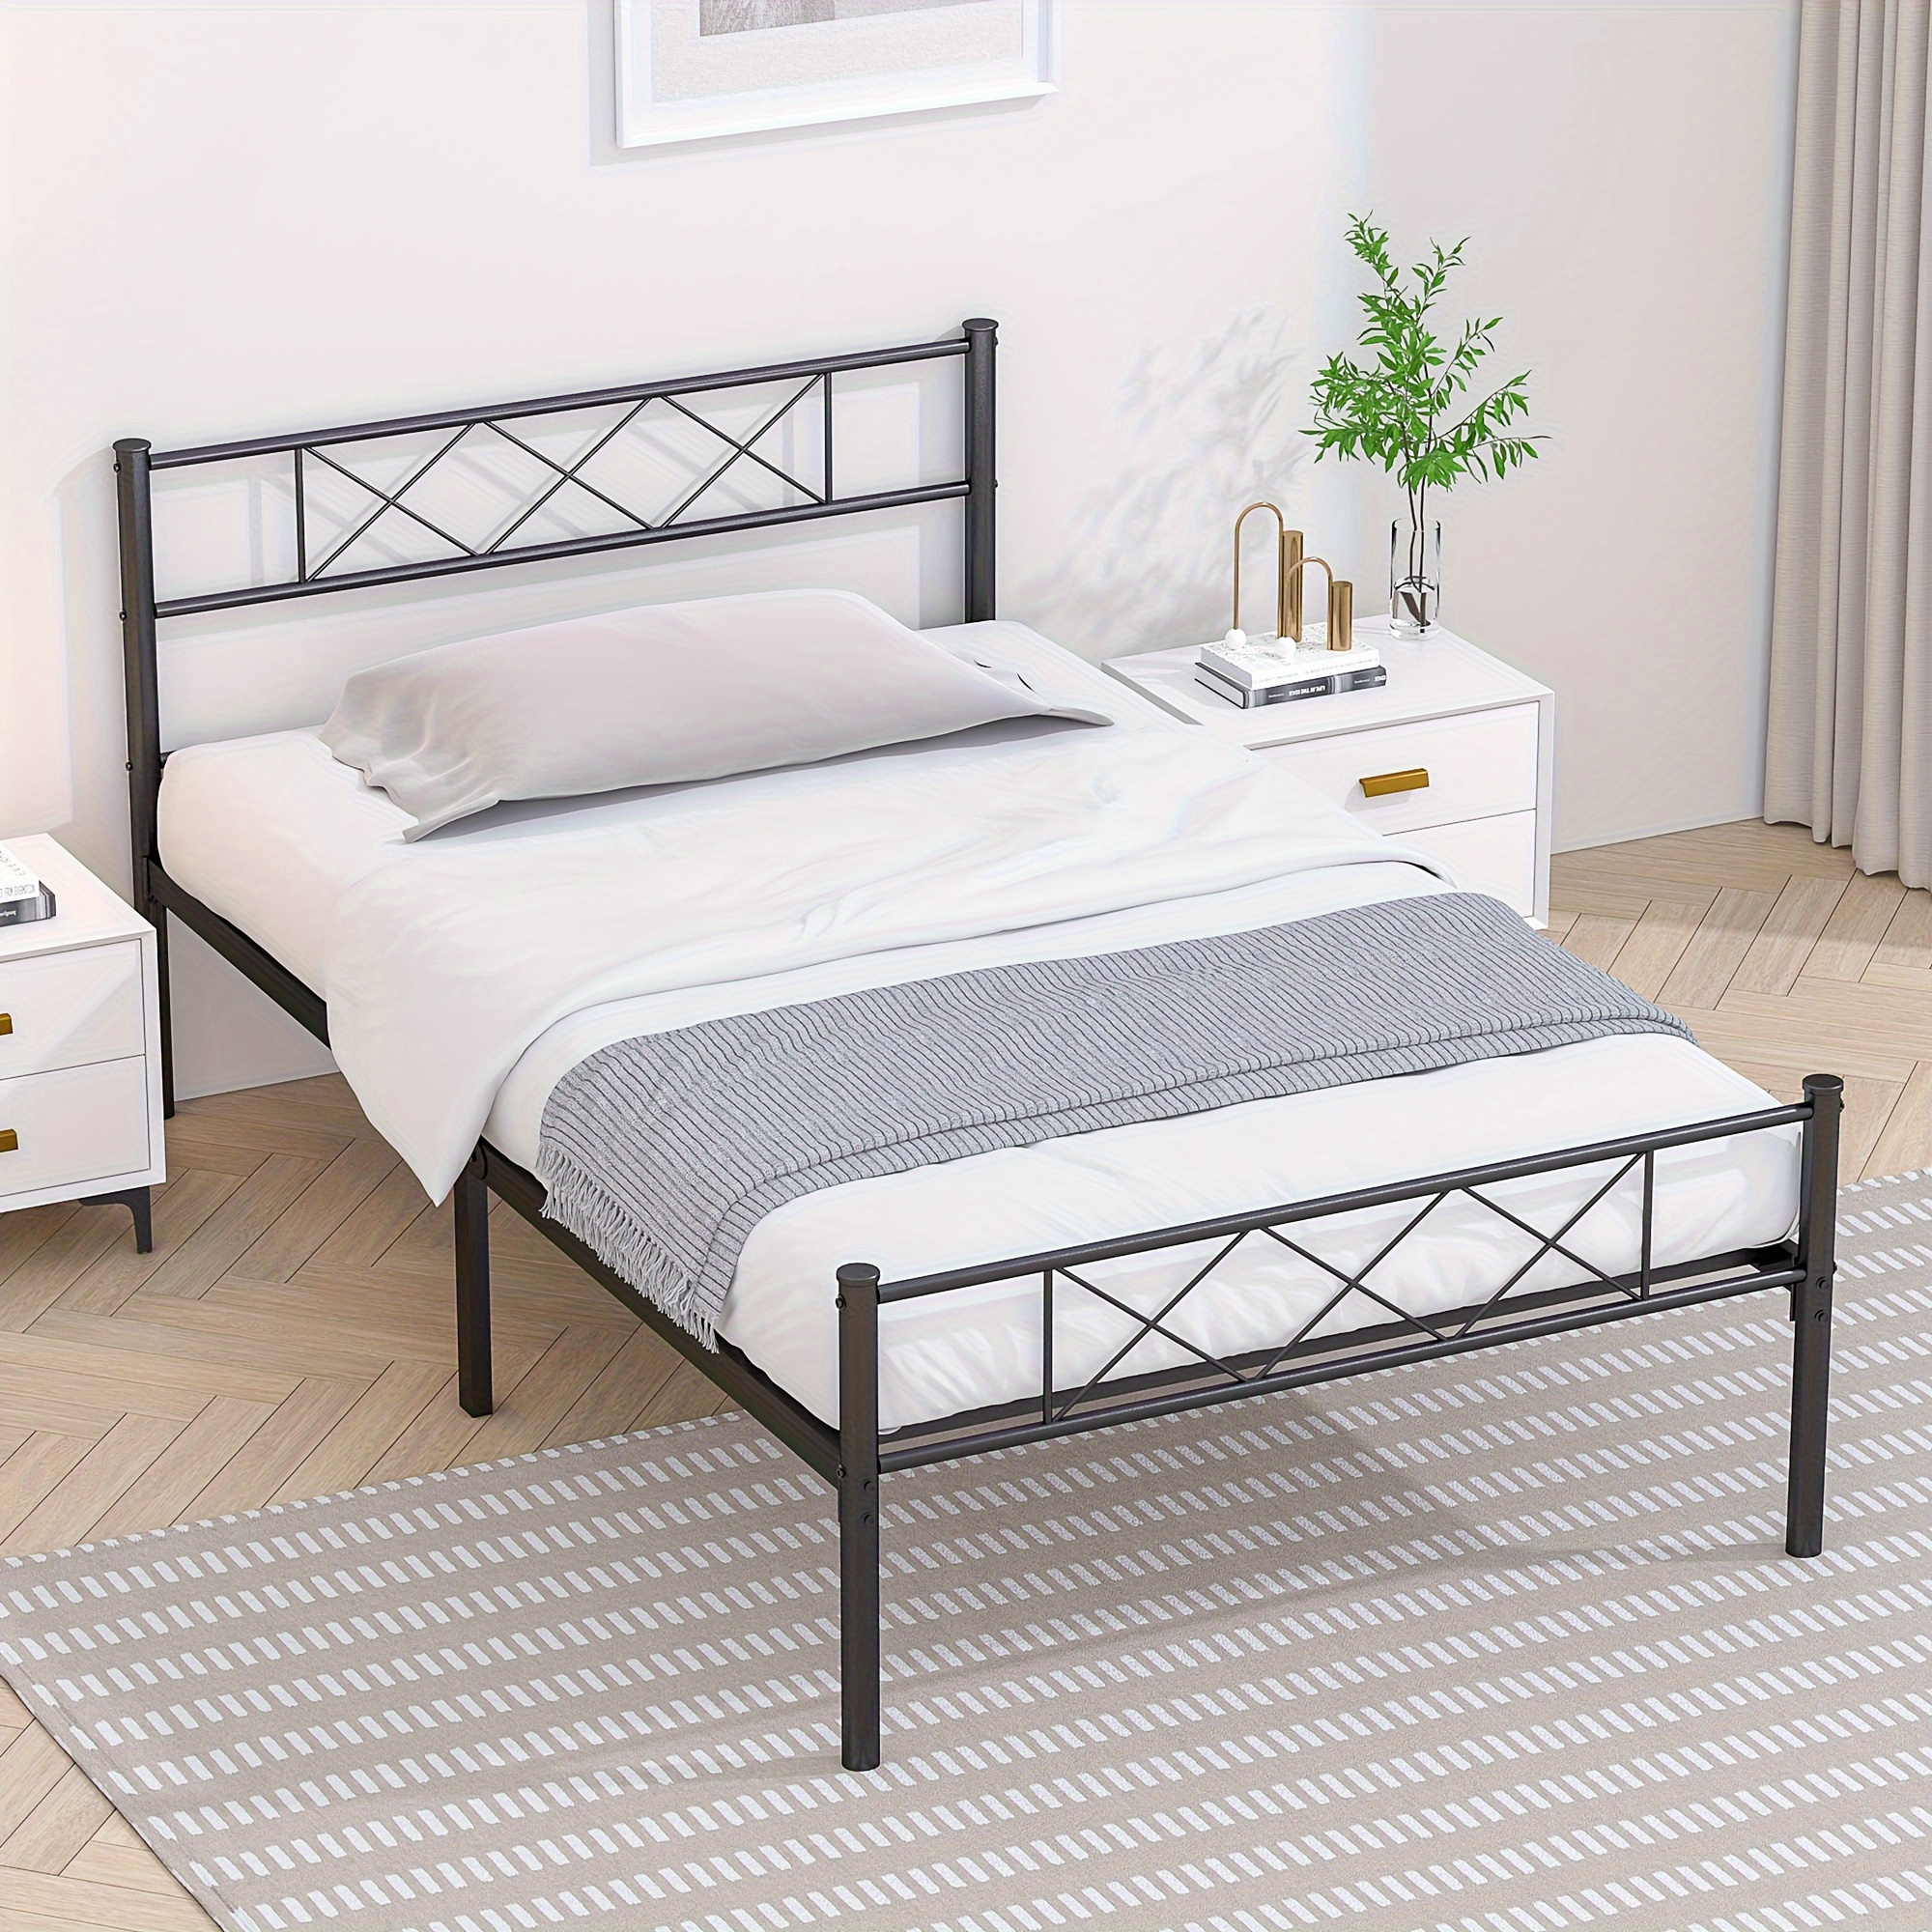 

Vecelo Metal Bed Frame With Headboard/footboard, Twin Size Queen Size Bed Frame, No Box Spring Needed